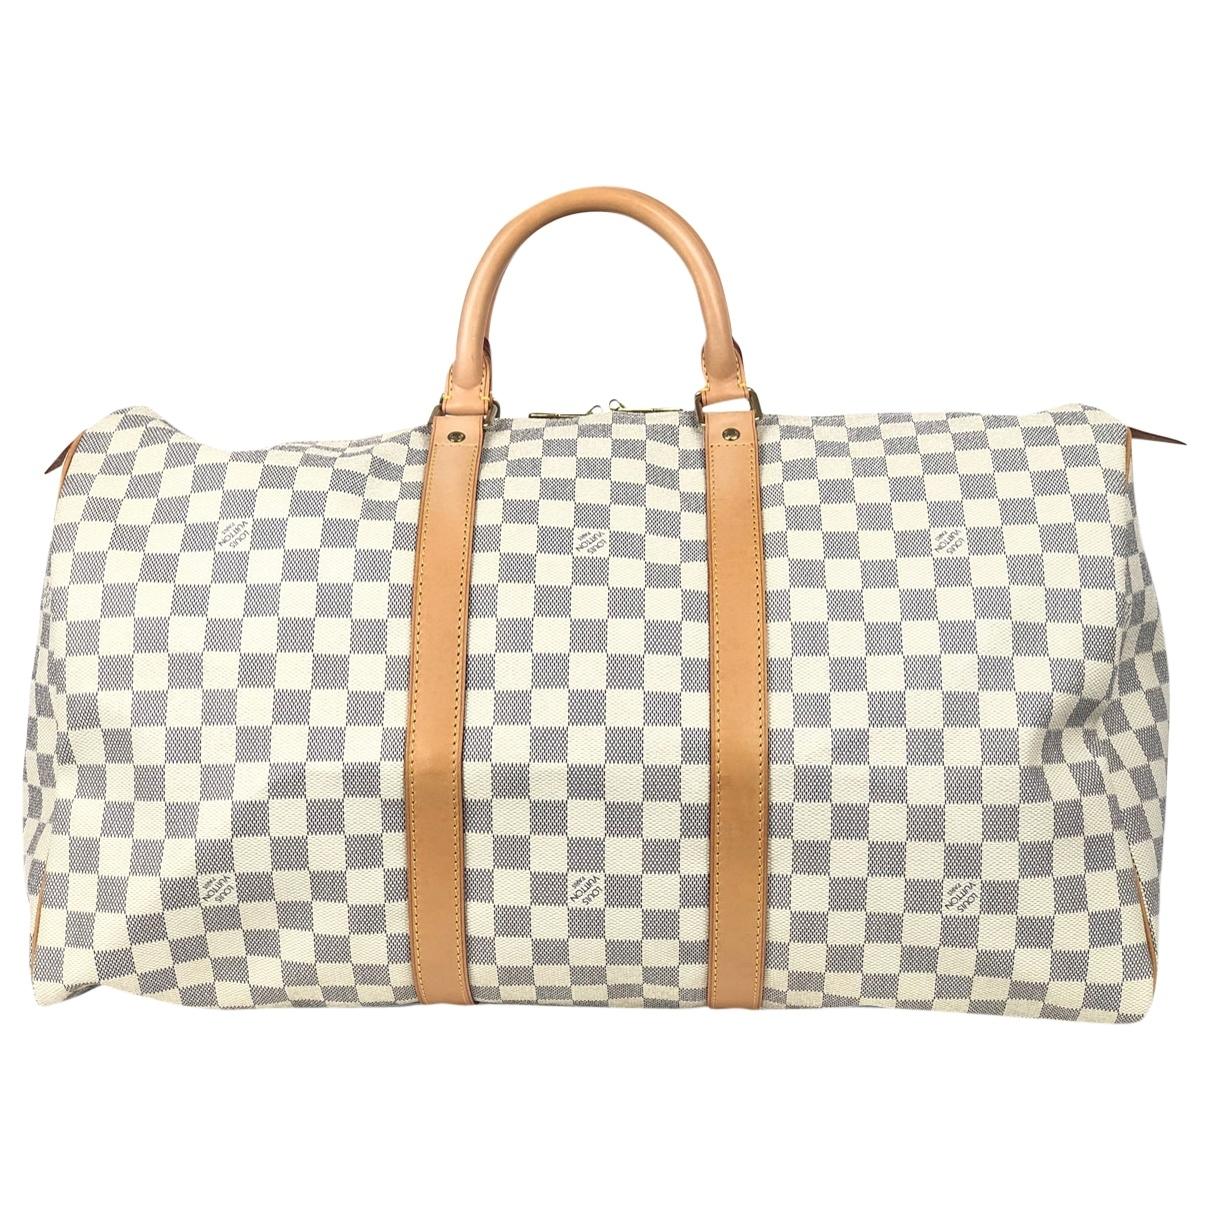 Lyst - Louis Vuitton Keepall Grey Cloth Bag in Gray for Men